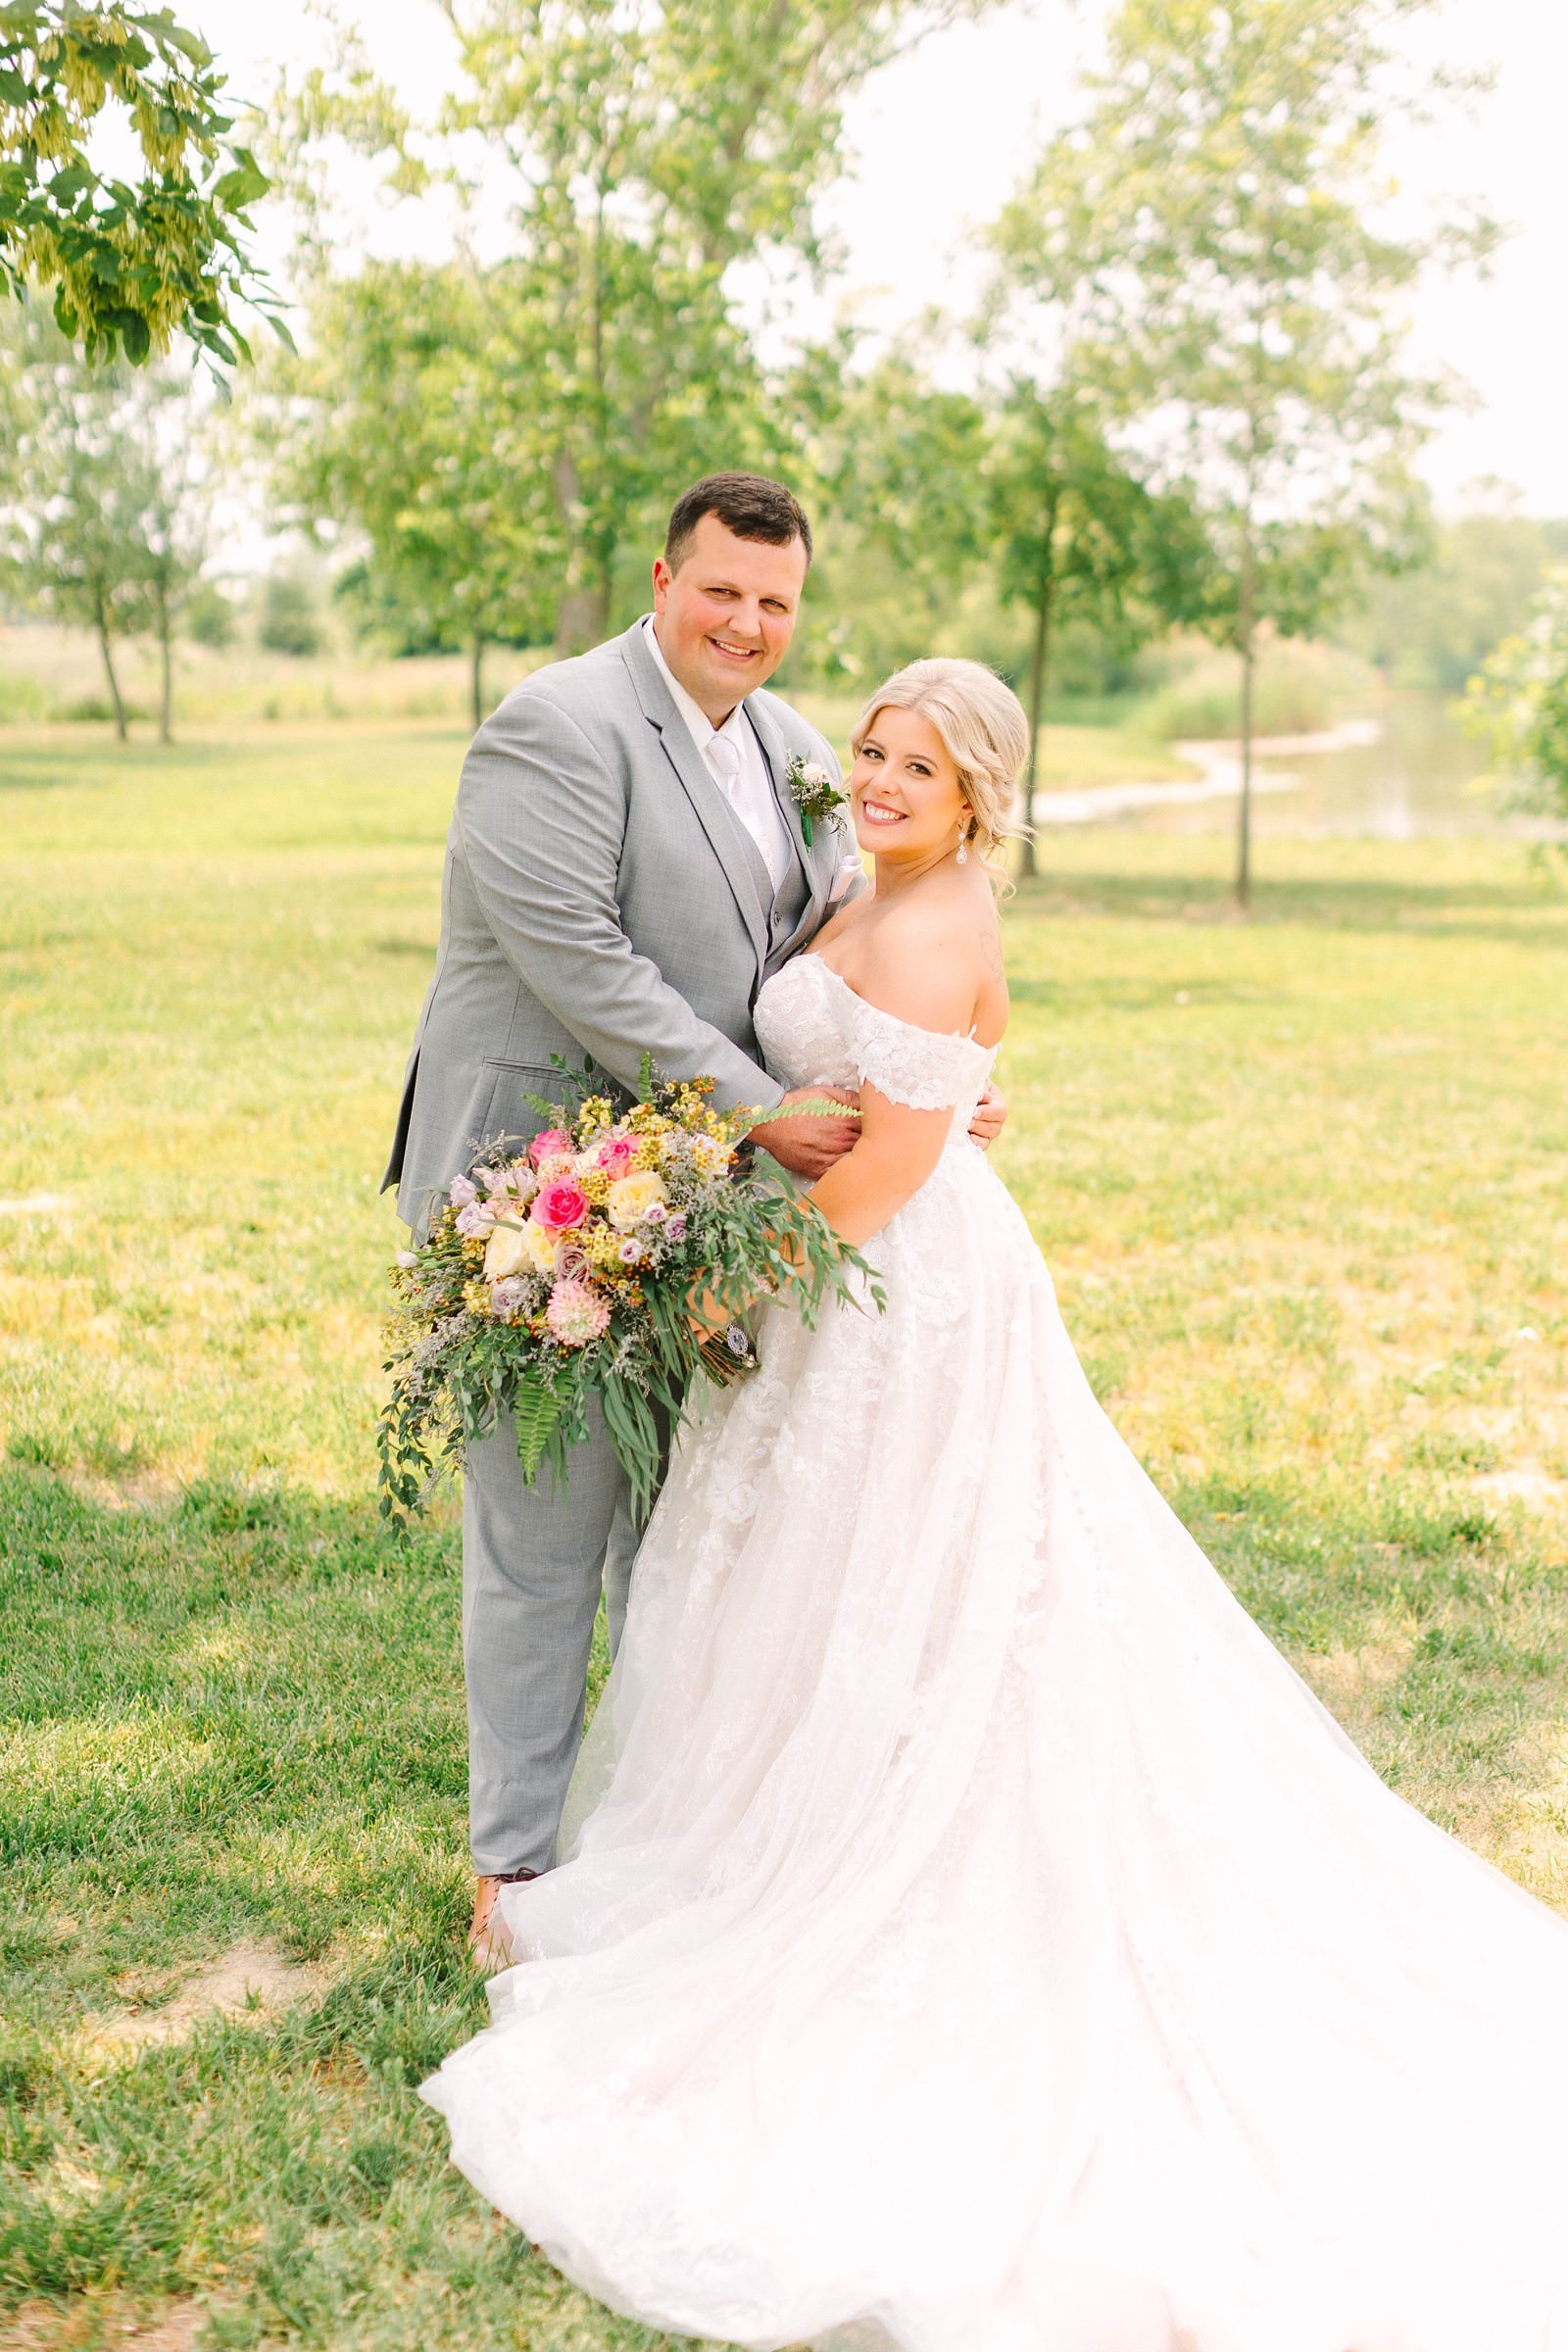 A Sunny Summer Wedding at Friedman Park in Newburgh Indiana | Paige and Dylan | Bret and Brandie Photography101.jpg